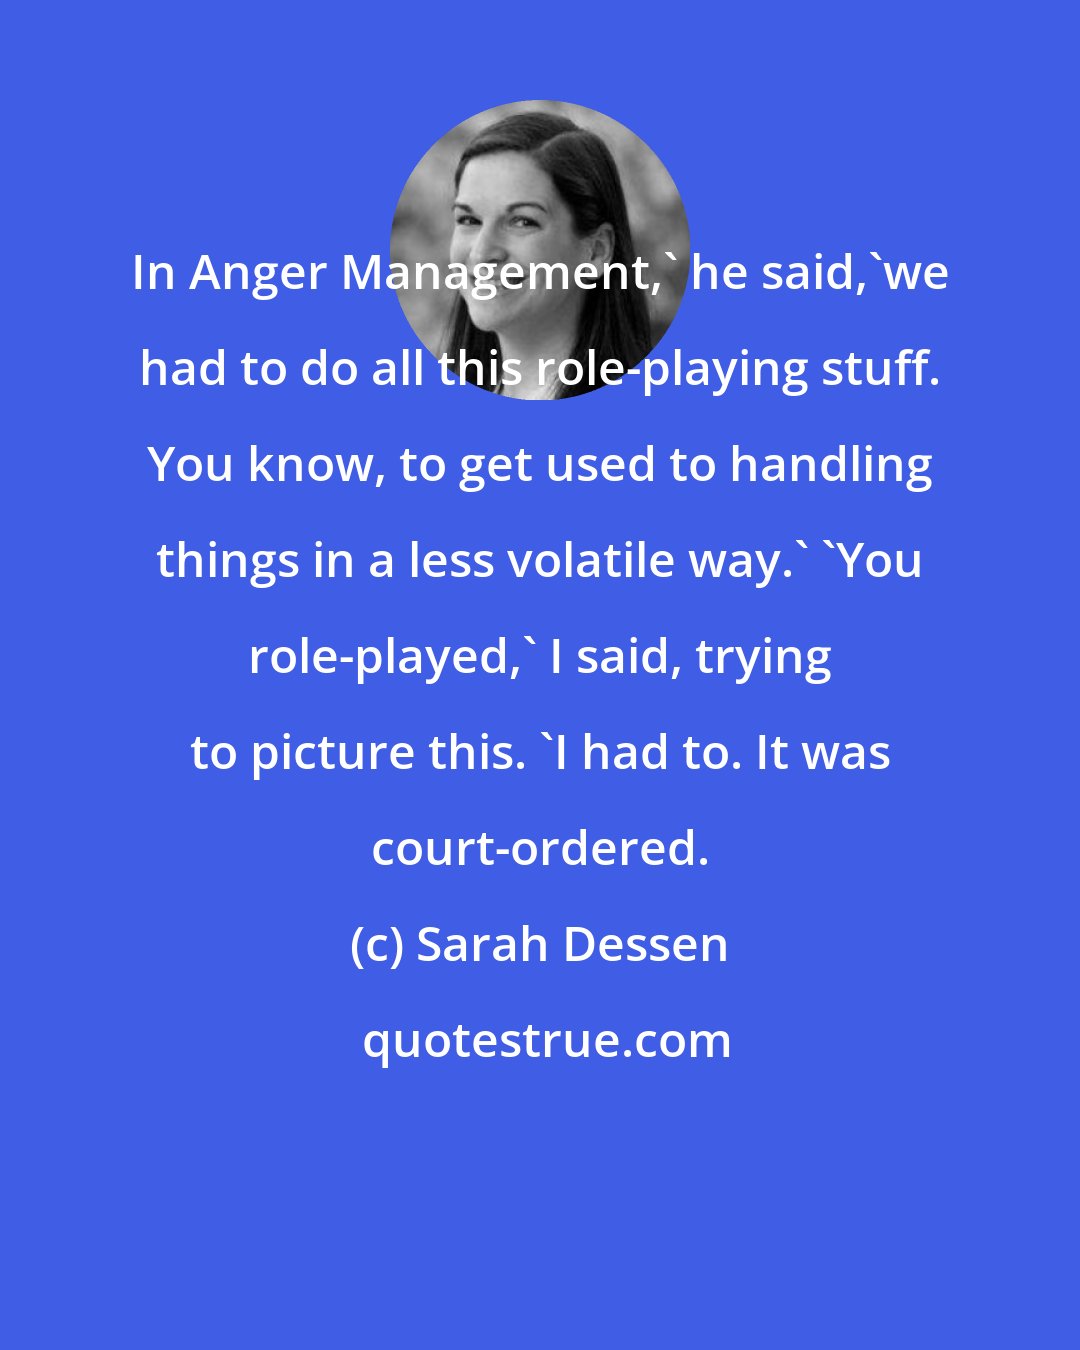 Sarah Dessen: In Anger Management,' he said,'we had to do all this role-playing stuff. You know, to get used to handling things in a less volatile way.' 'You role-played,' I said, trying to picture this. 'I had to. It was court-ordered.